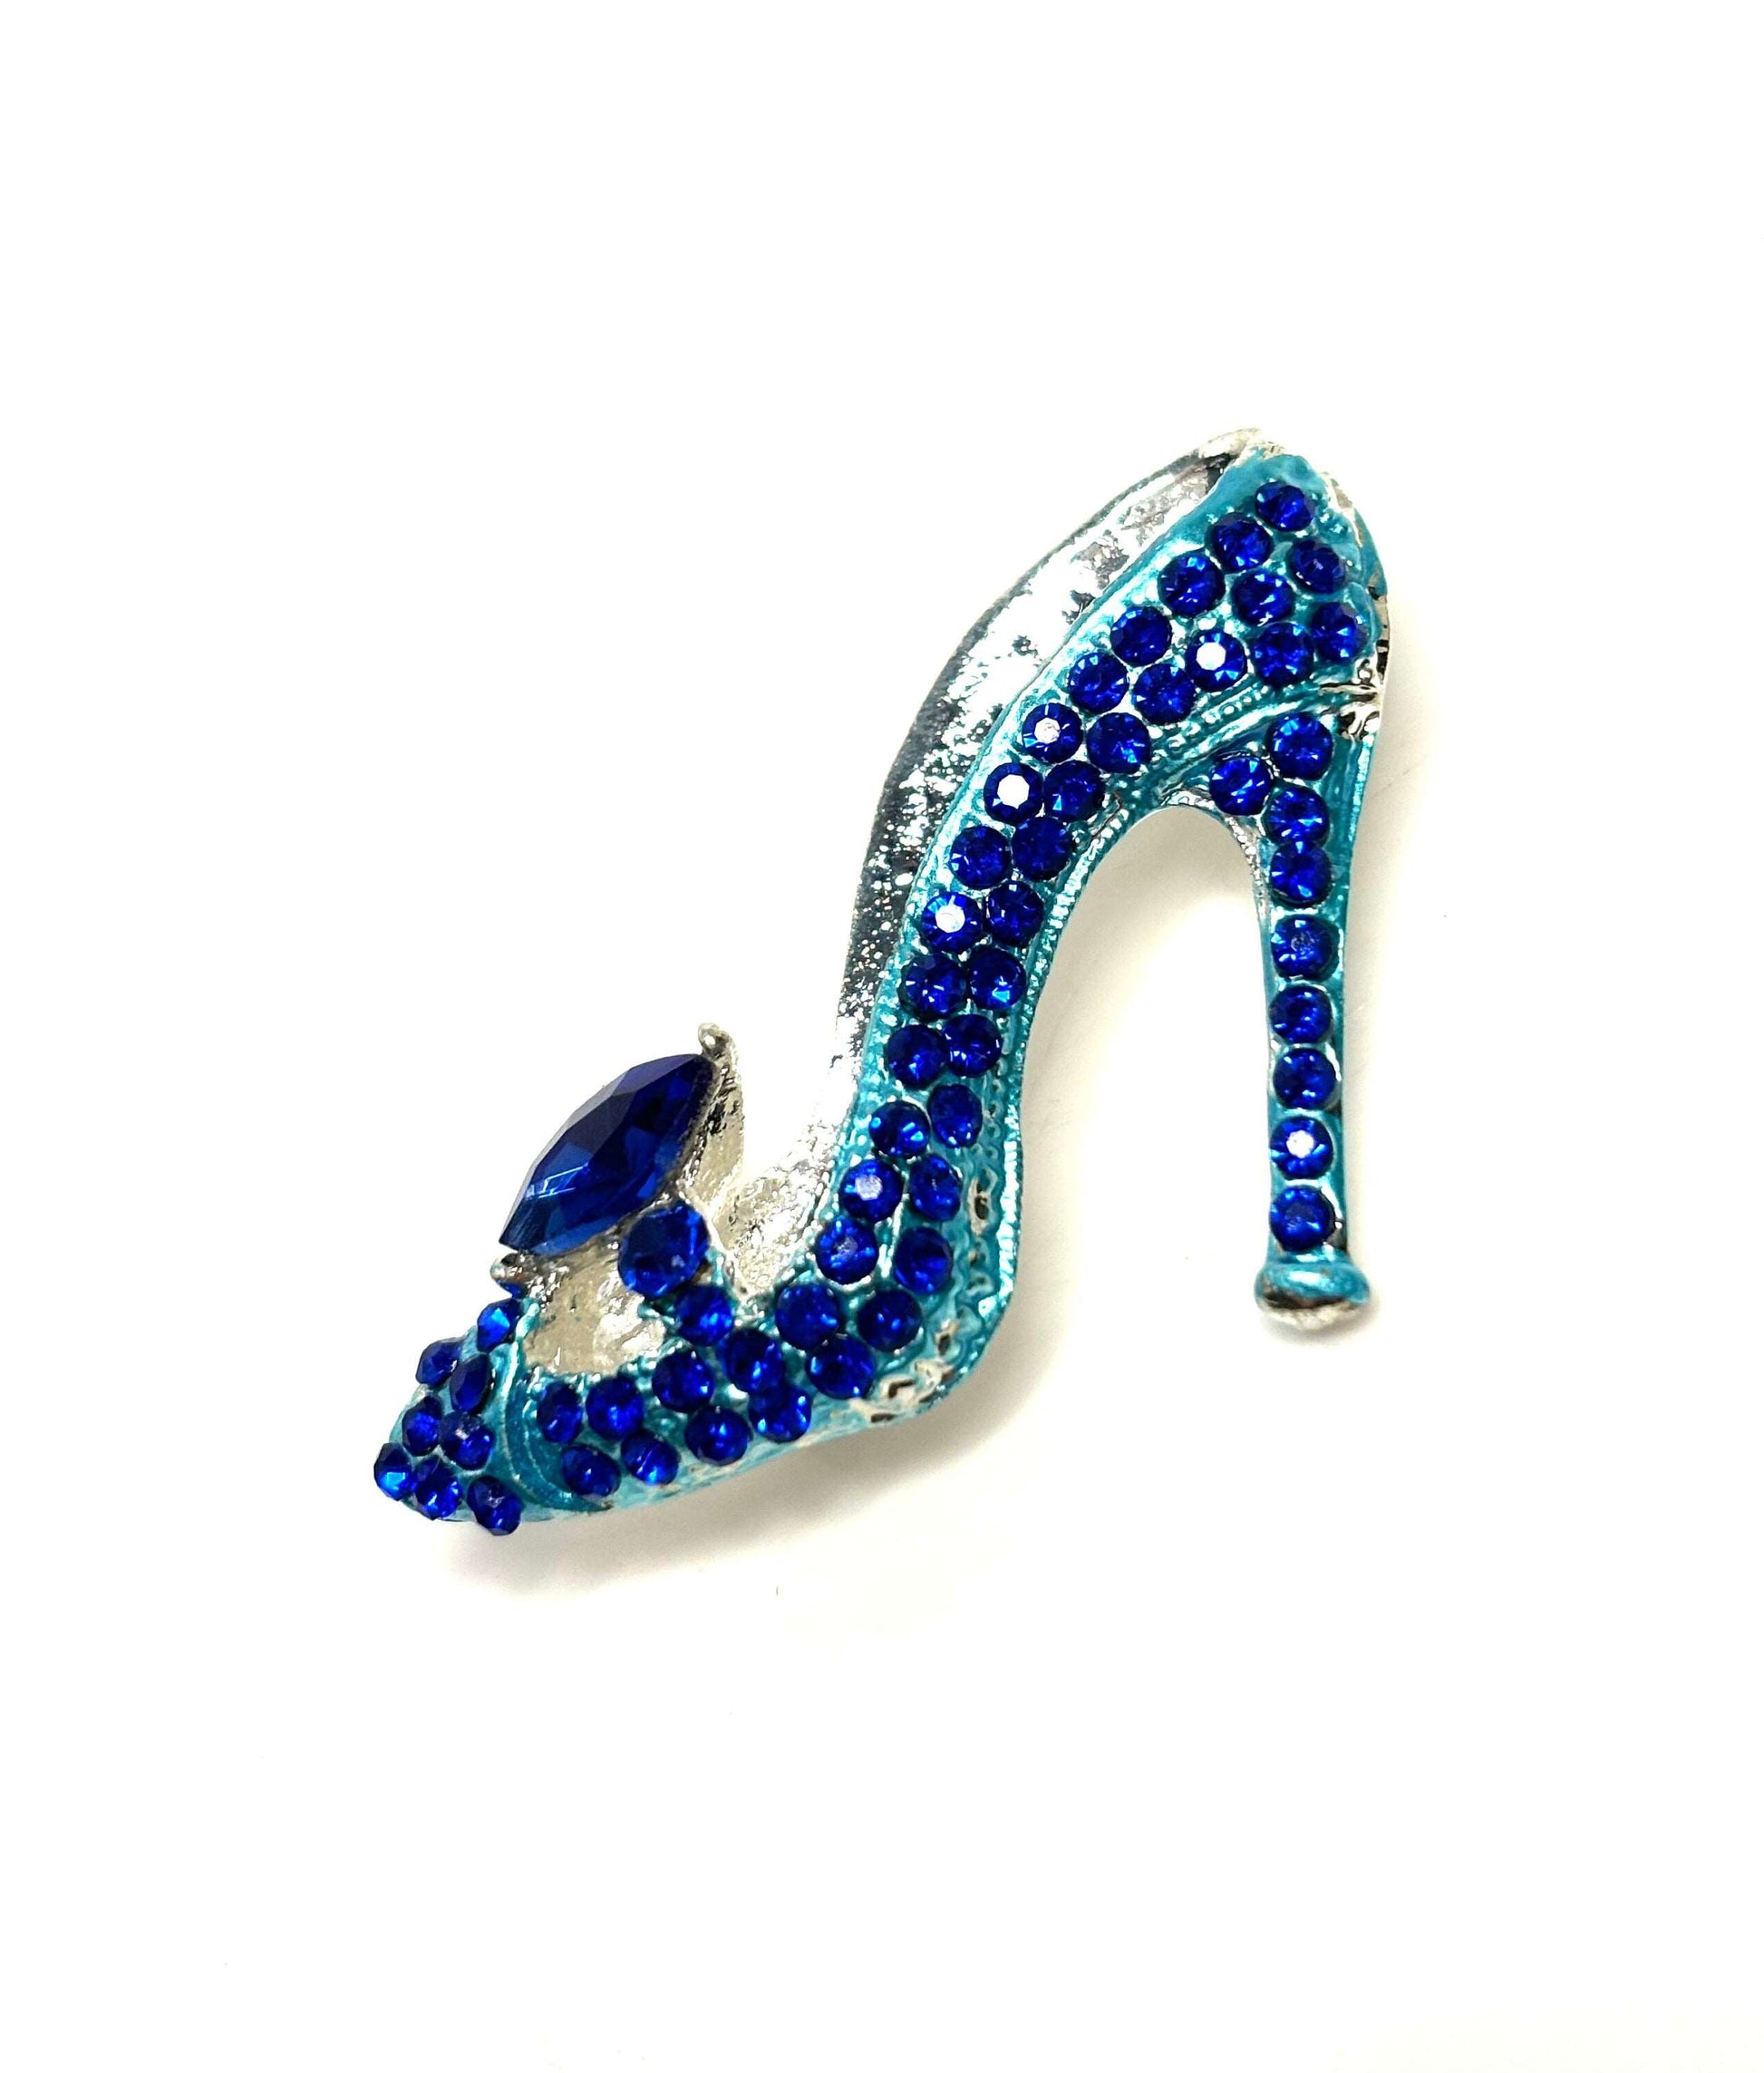 Blue Crystal Stiletto Shoe Brooch, Sapphire Crystal Shoe, Sparkly Fashion Accessory Pin, Stylish High Heel Pin, Brooches for Women